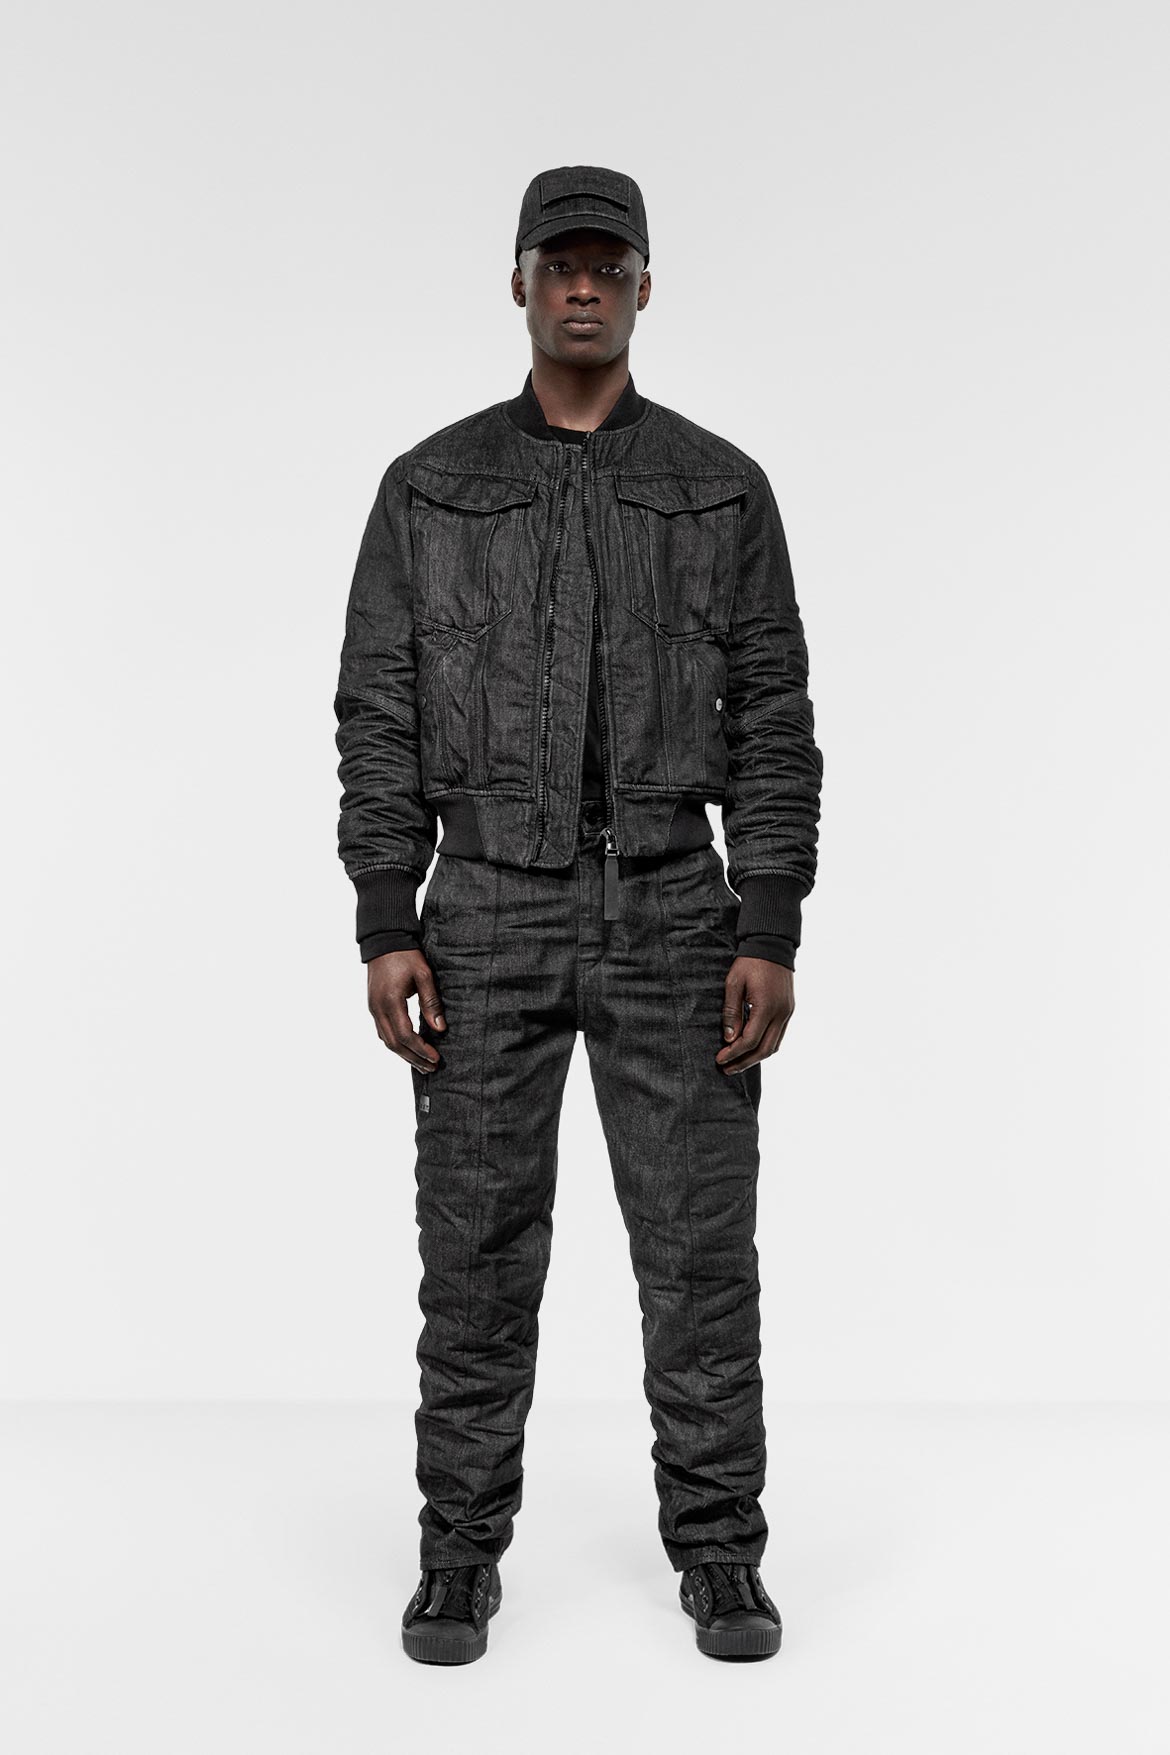 G-STAR-RAW-RESEARCH-II-BY-AITOR-THROUP-2